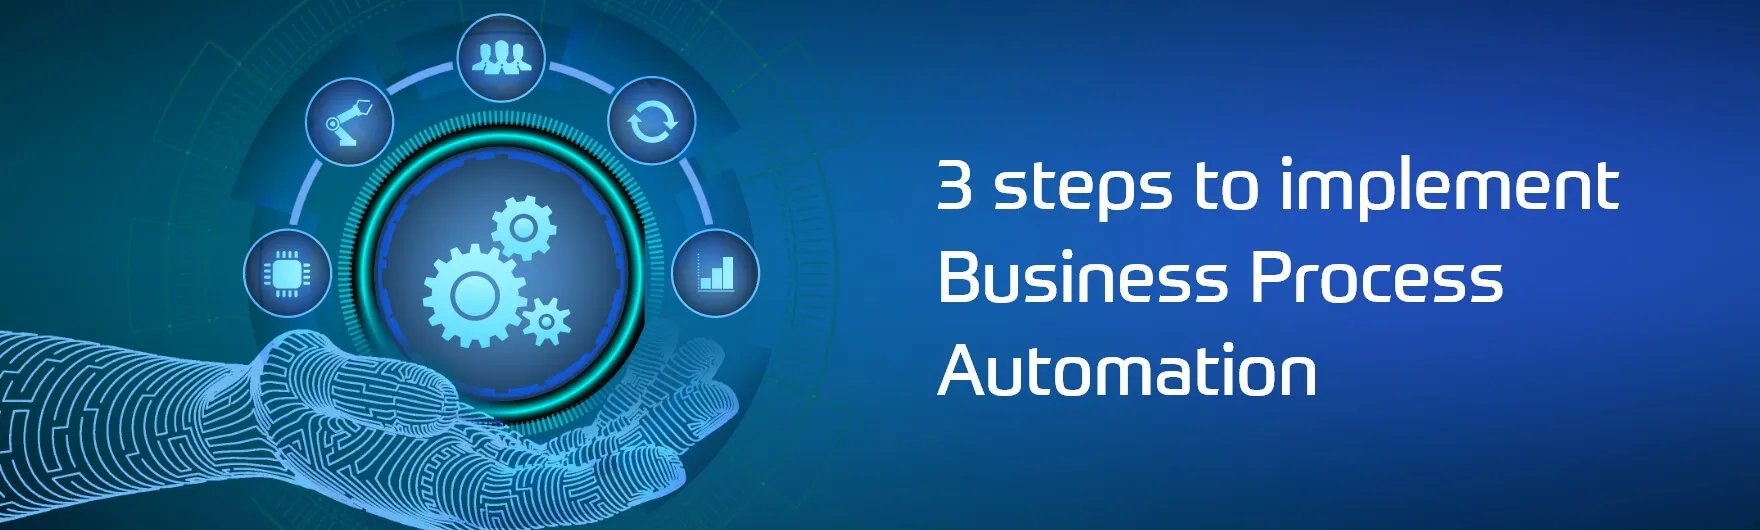 3 steps to implement Business Process Automation